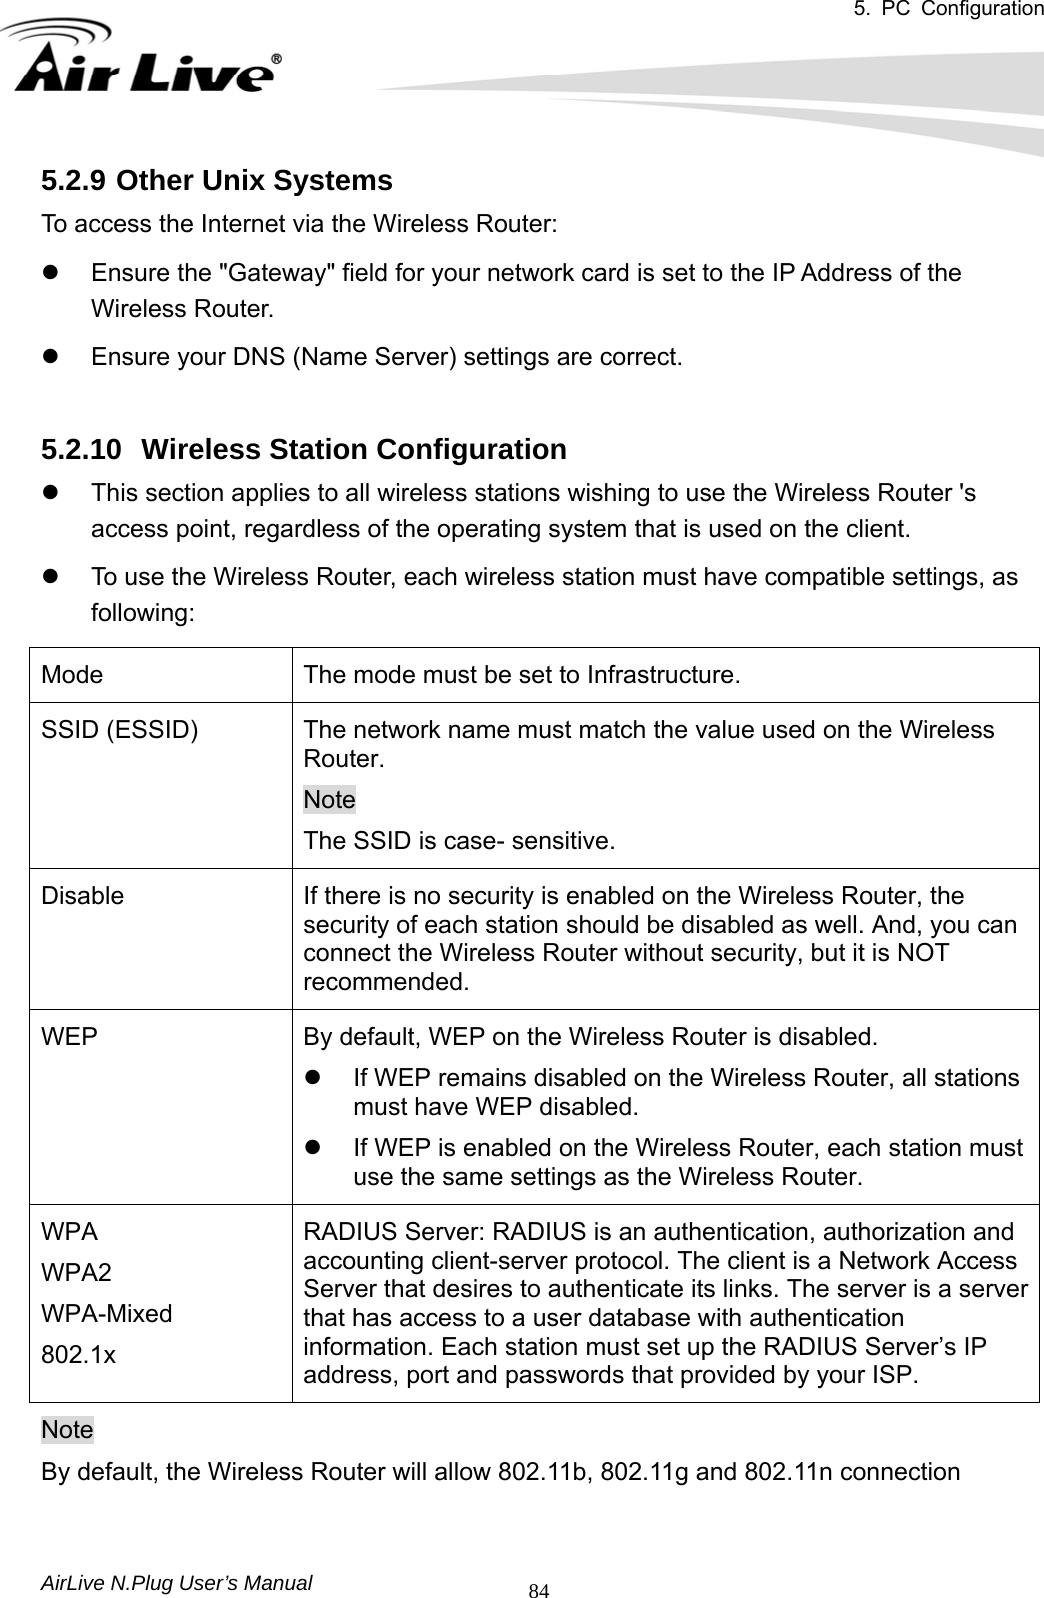 5. PC Configuration       AirLive N.Plug User’s Manual  845.2.9 Other Unix Systems To access the Internet via the Wireless Router:   z  Ensure the &quot;Gateway&quot; field for your network card is set to the IP Address of the Wireless Router.   z  Ensure your DNS (Name Server) settings are correct.    5.2.10  Wireless Station Configuration z  This section applies to all wireless stations wishing to use the Wireless Router &apos;s access point, regardless of the operating system that is used on the client.   z  To use the Wireless Router, each wireless station must have compatible settings, as following: Mode      The mode must be set to Infrastructure. SSID (ESSID)  The network name must match the value used on the Wireless Router.  Note The SSID is case- sensitive. Disable  If there is no security is enabled on the Wireless Router, the security of each station should be disabled as well. And, you can connect the Wireless Router without security, but it is NOT recommended. WEP  By default, WEP on the Wireless Router is disabled.   z  If WEP remains disabled on the Wireless Router, all stations must have WEP disabled.   z  If WEP is enabled on the Wireless Router, each station must use the same settings as the Wireless Router. WPA  WPA2  WPA-Mixed  802.1x RADIUS Server: RADIUS is an authentication, authorization and accounting client-server protocol. The client is a Network Access Server that desires to authenticate its links. The server is a server that has access to a user database with authentication information. Each station must set up the RADIUS Server’s IP address, port and passwords that provided by your ISP. Note By default, the Wireless Router will allow 802.11b, 802.11g and 802.11n connection 